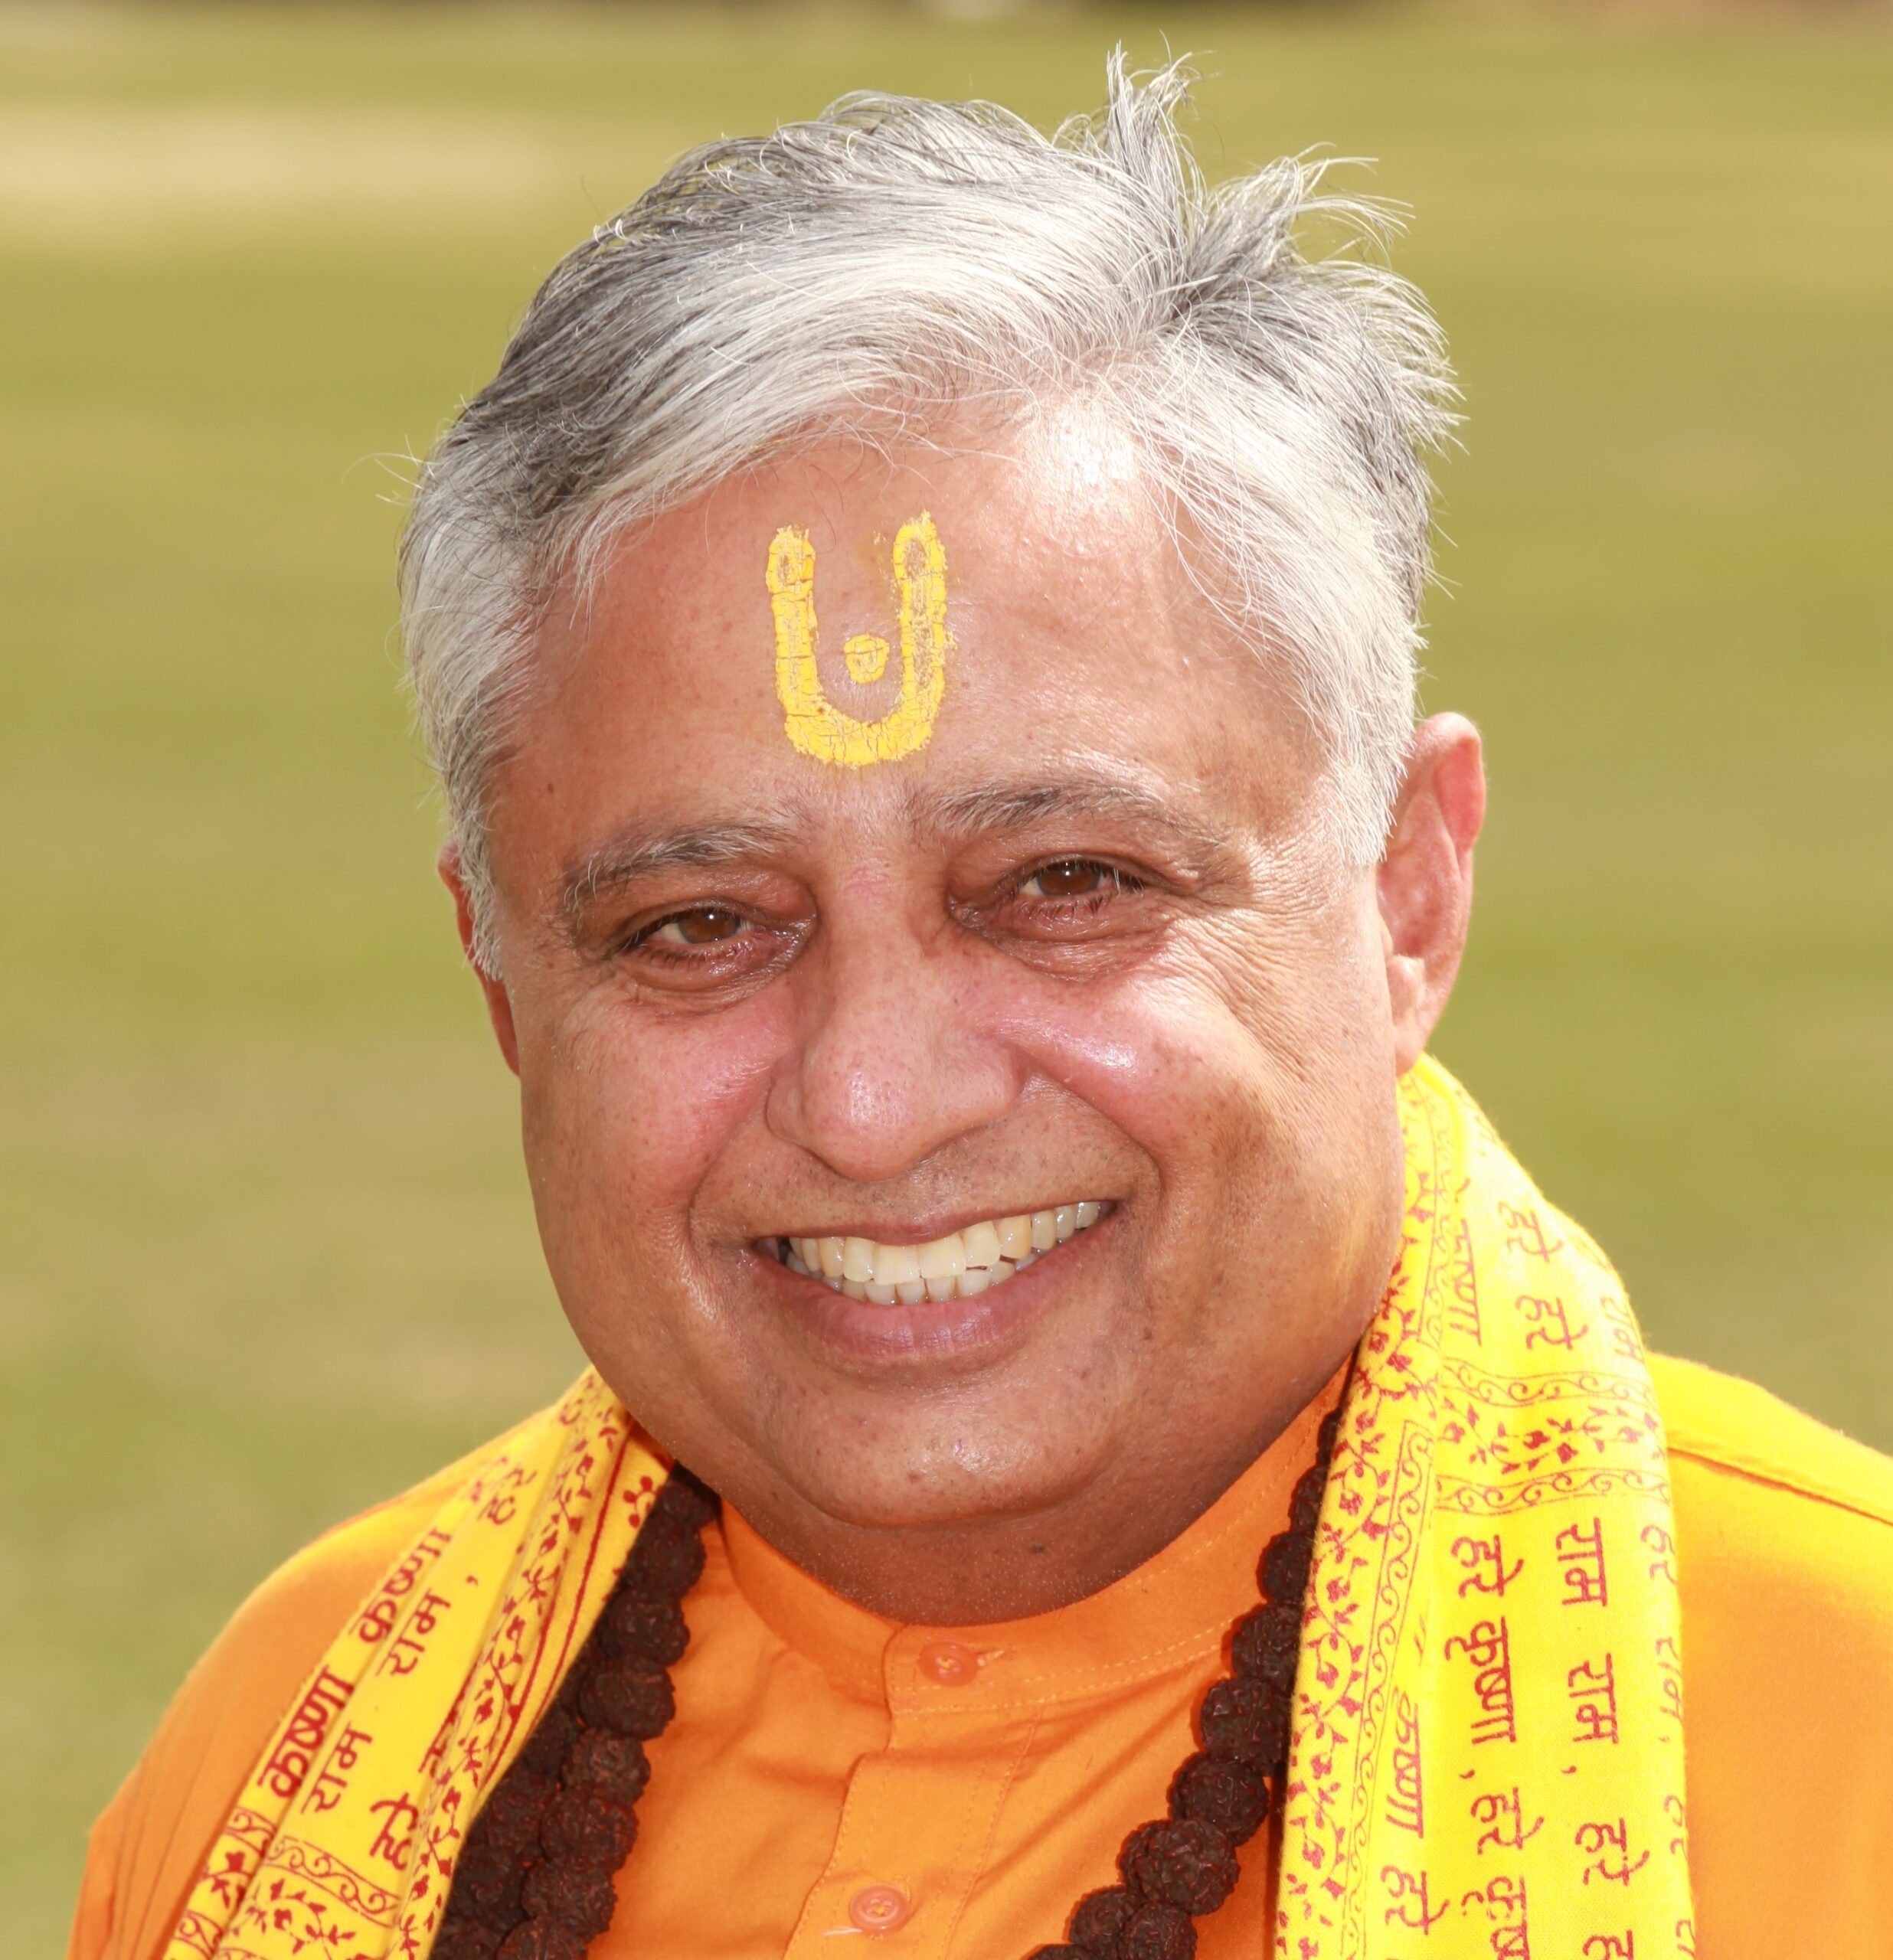 Hindu mantras to start the day of Alabama House of Representatives 1st time on May 2